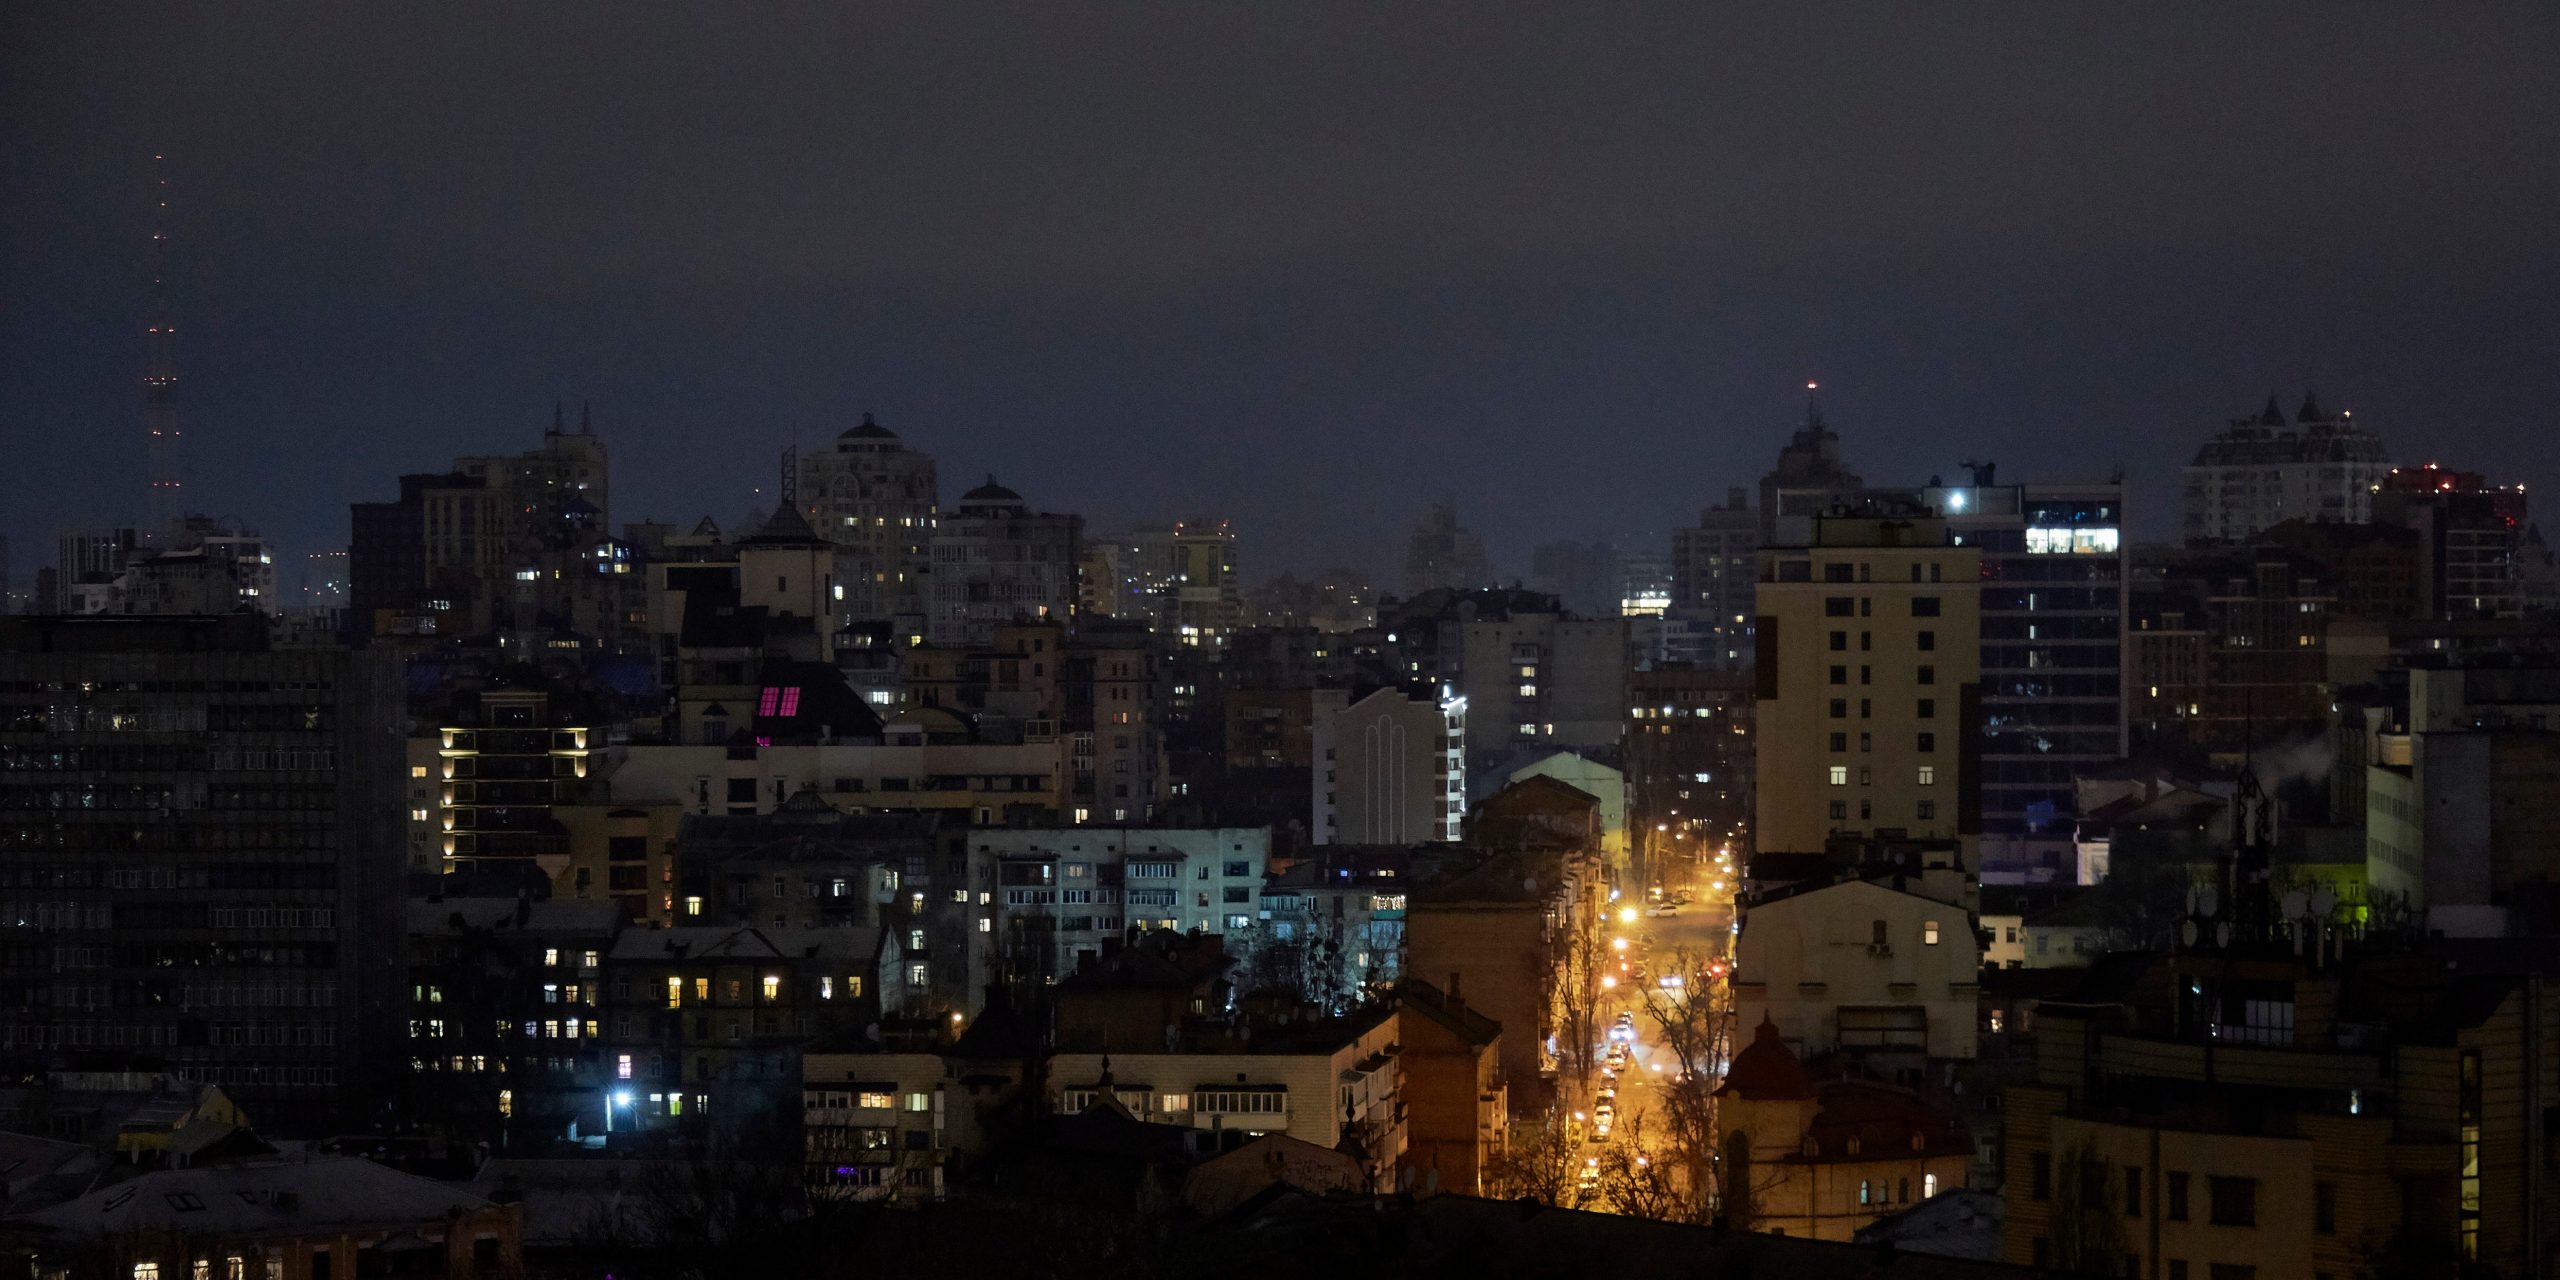 A night view of Kyiv as the Kyiv mayor declared a curfew from 10pm to 7am on February 24, 2022 in Kyiv, Ukraine.